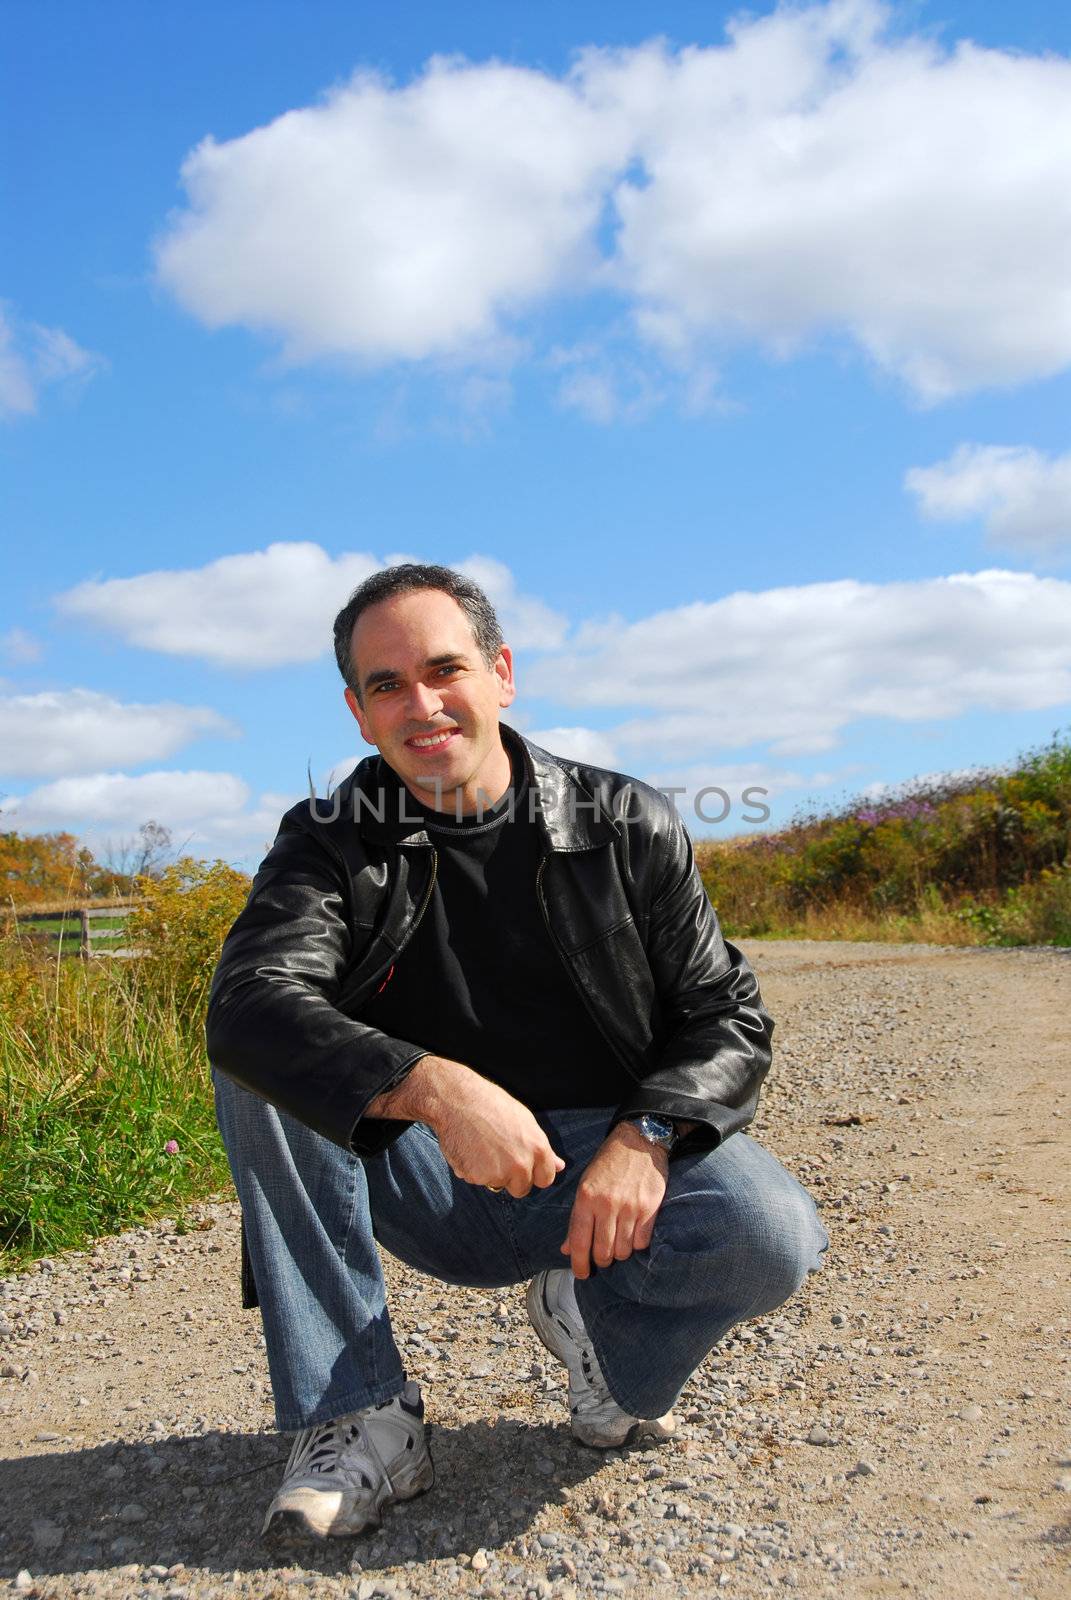 Smiling man sitting on a country road